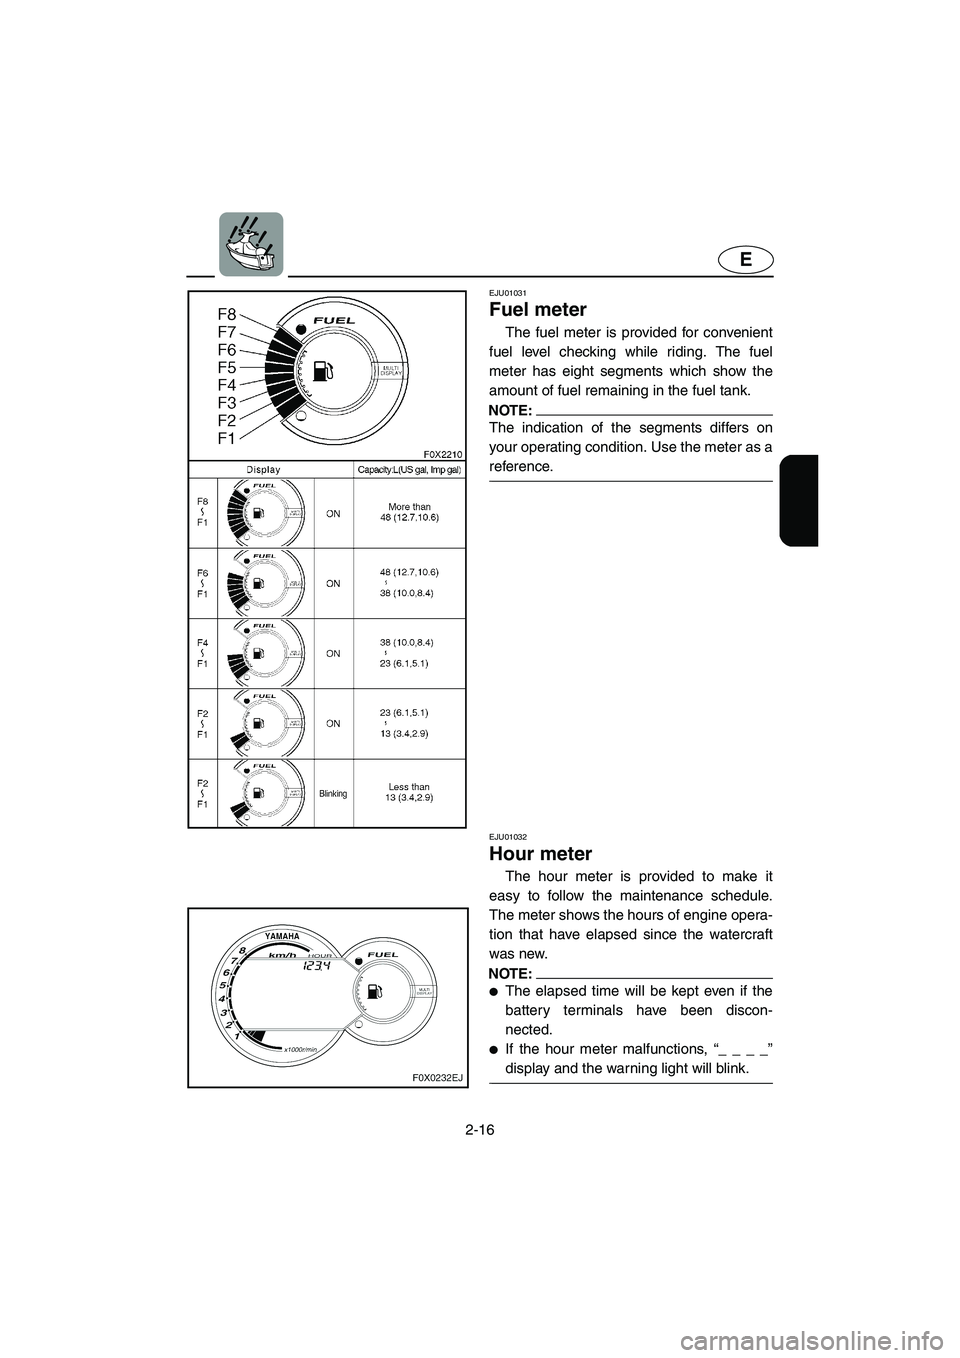 YAMAHA GP800R 2002 Service Manual 2-16
E
EJU01031 
Fuel meter  
The fuel meter is provided for convenient
fuel level checking while riding. The fuel
meter has eight segments which show the
amount of fuel remaining in the fuel tank. 
N